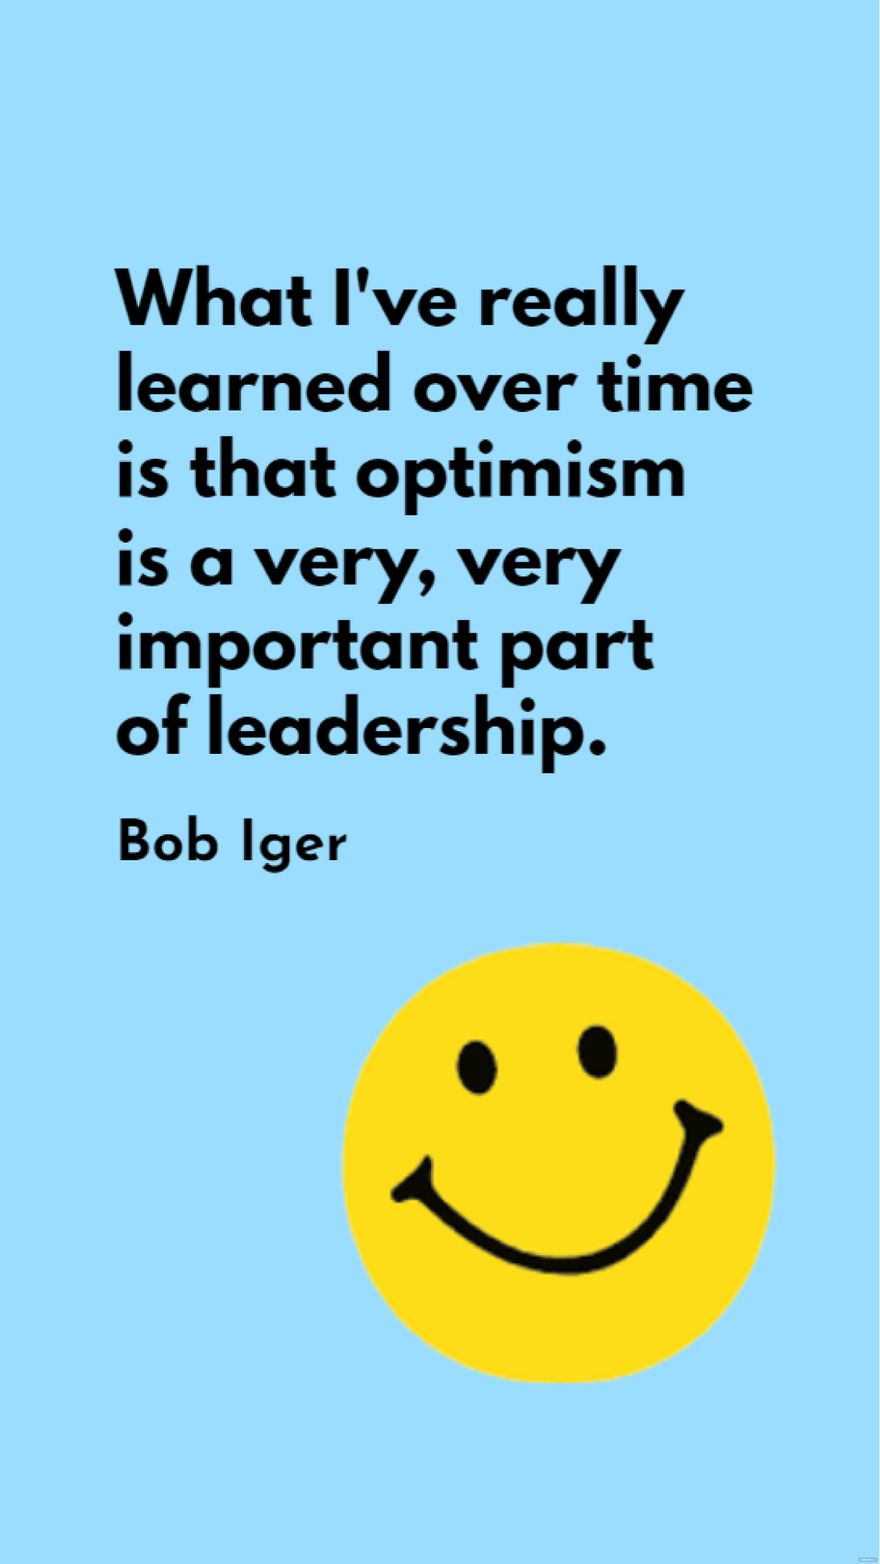 Bob Iger - What I've really learned over time is that optimism is a very, very important part of leadership.